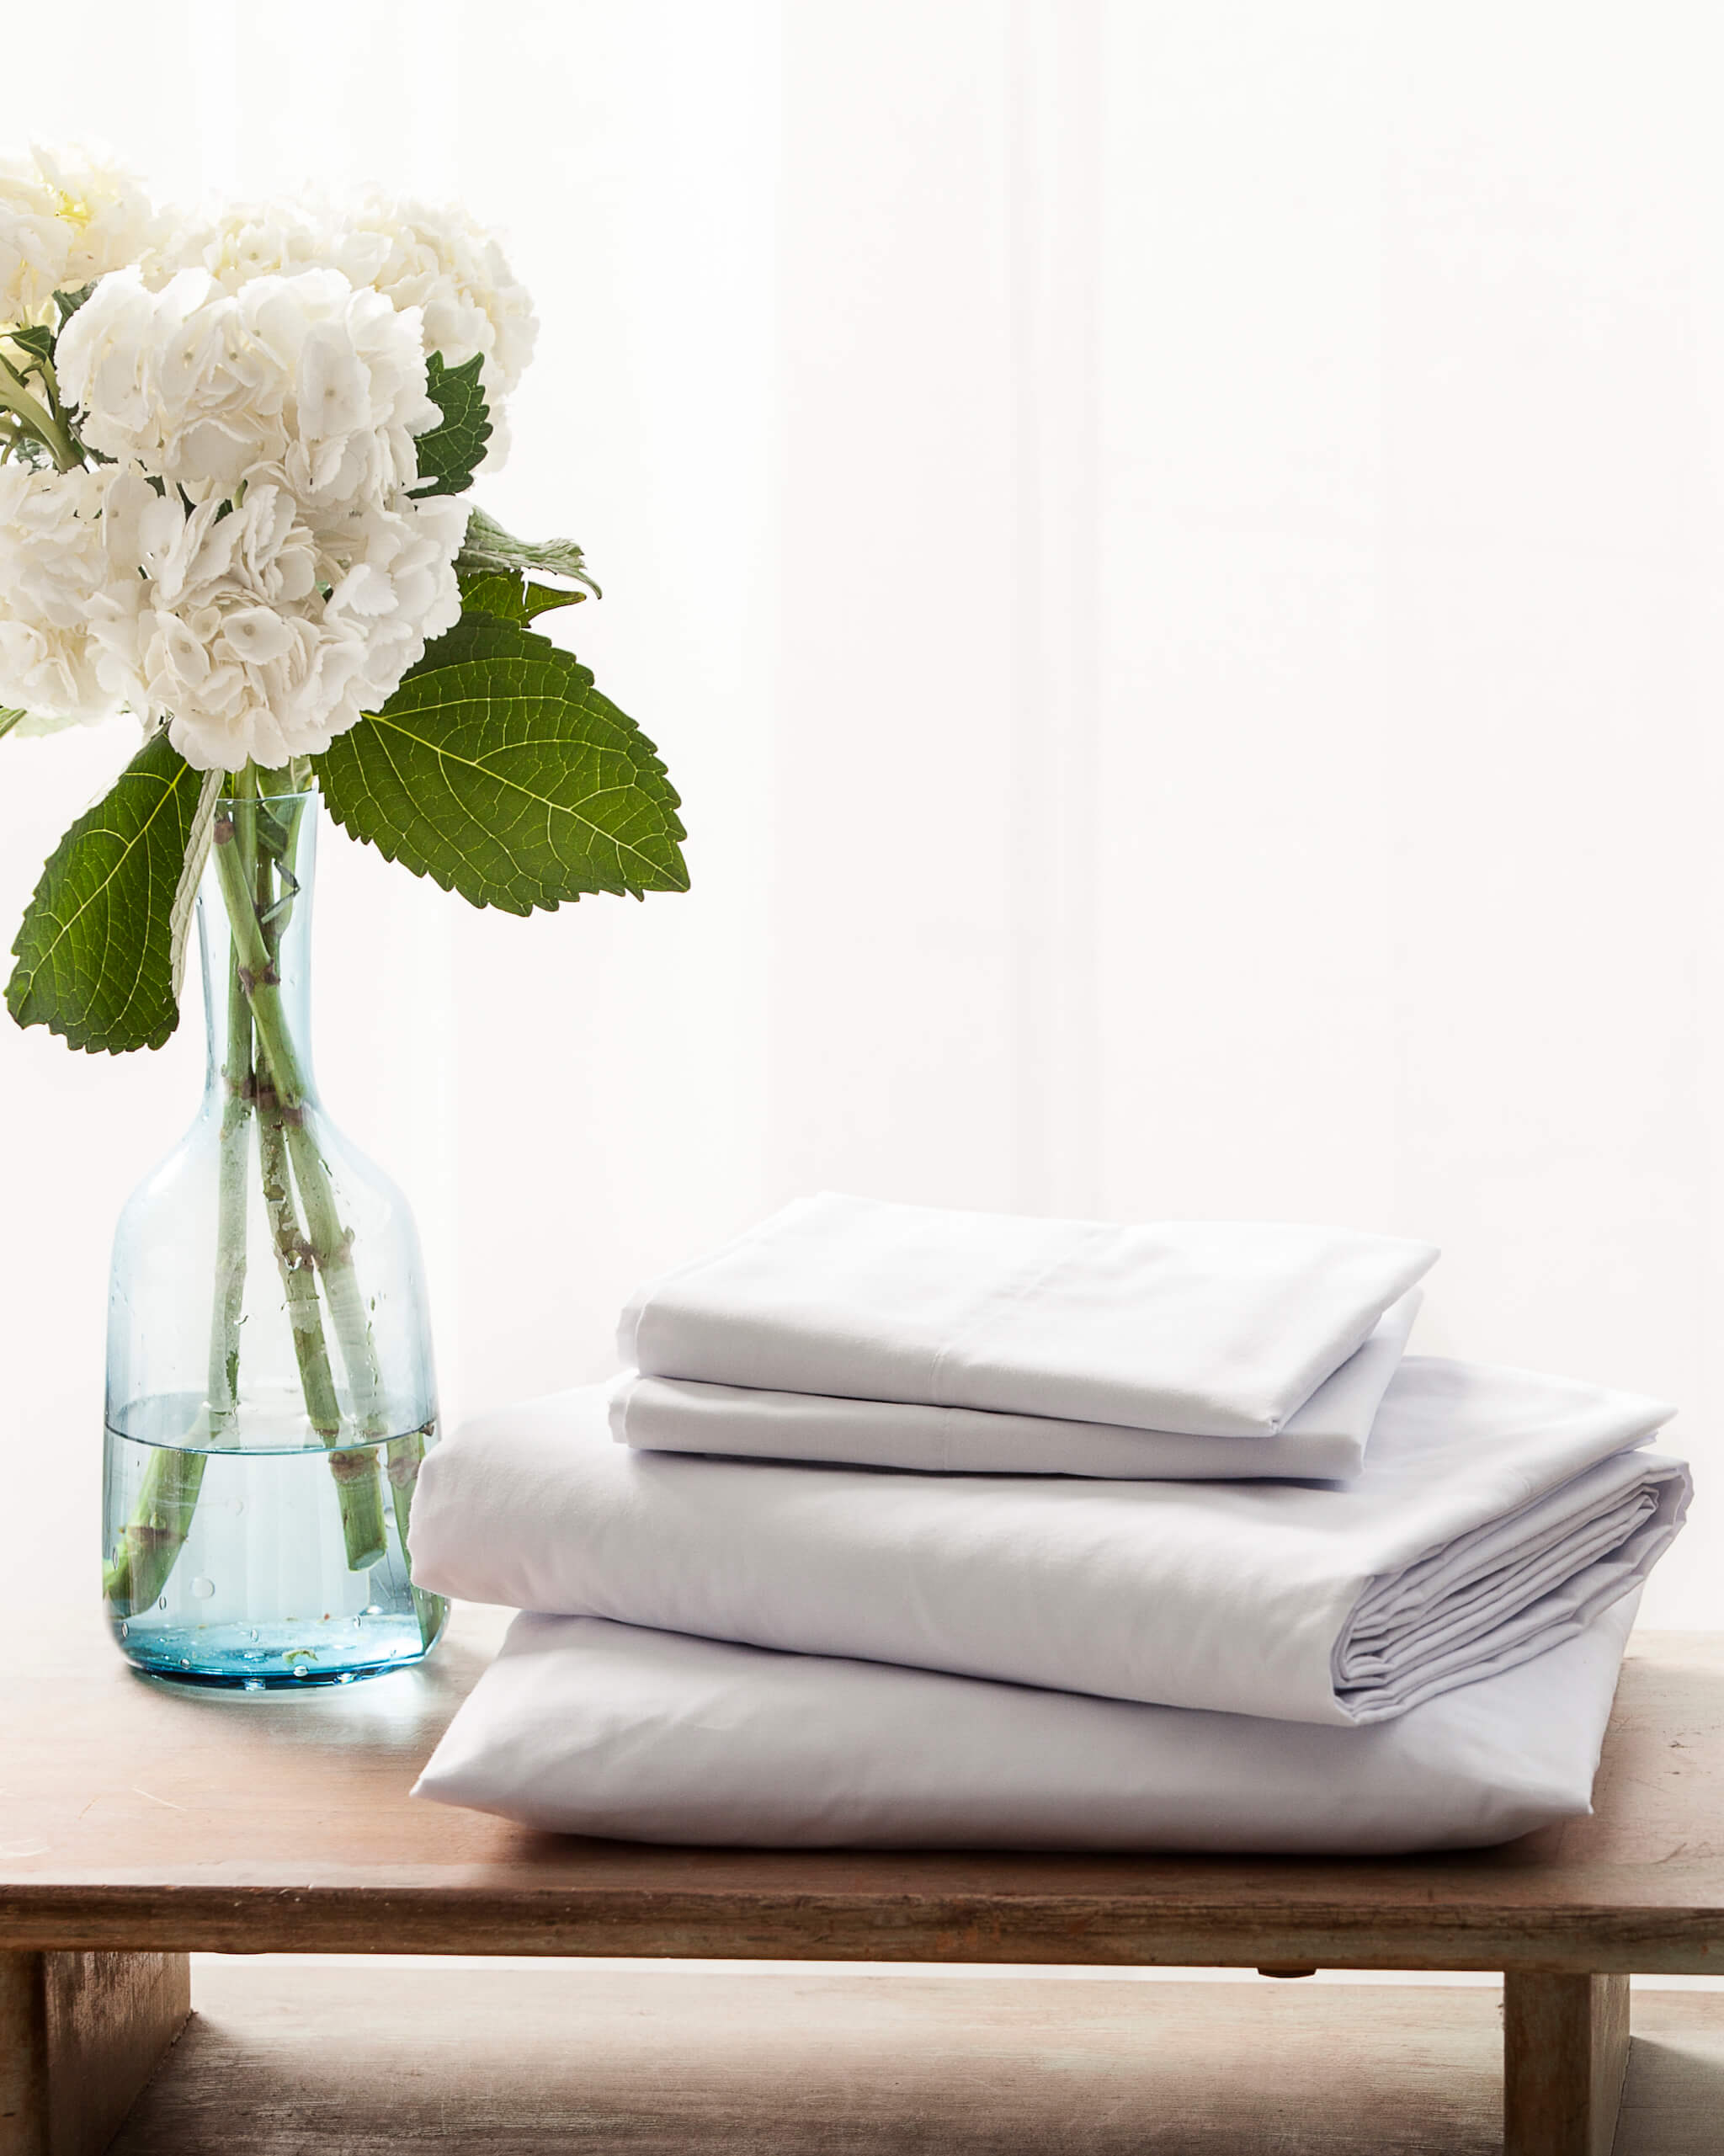 A50 White Fitted Sheets - Authenticity50